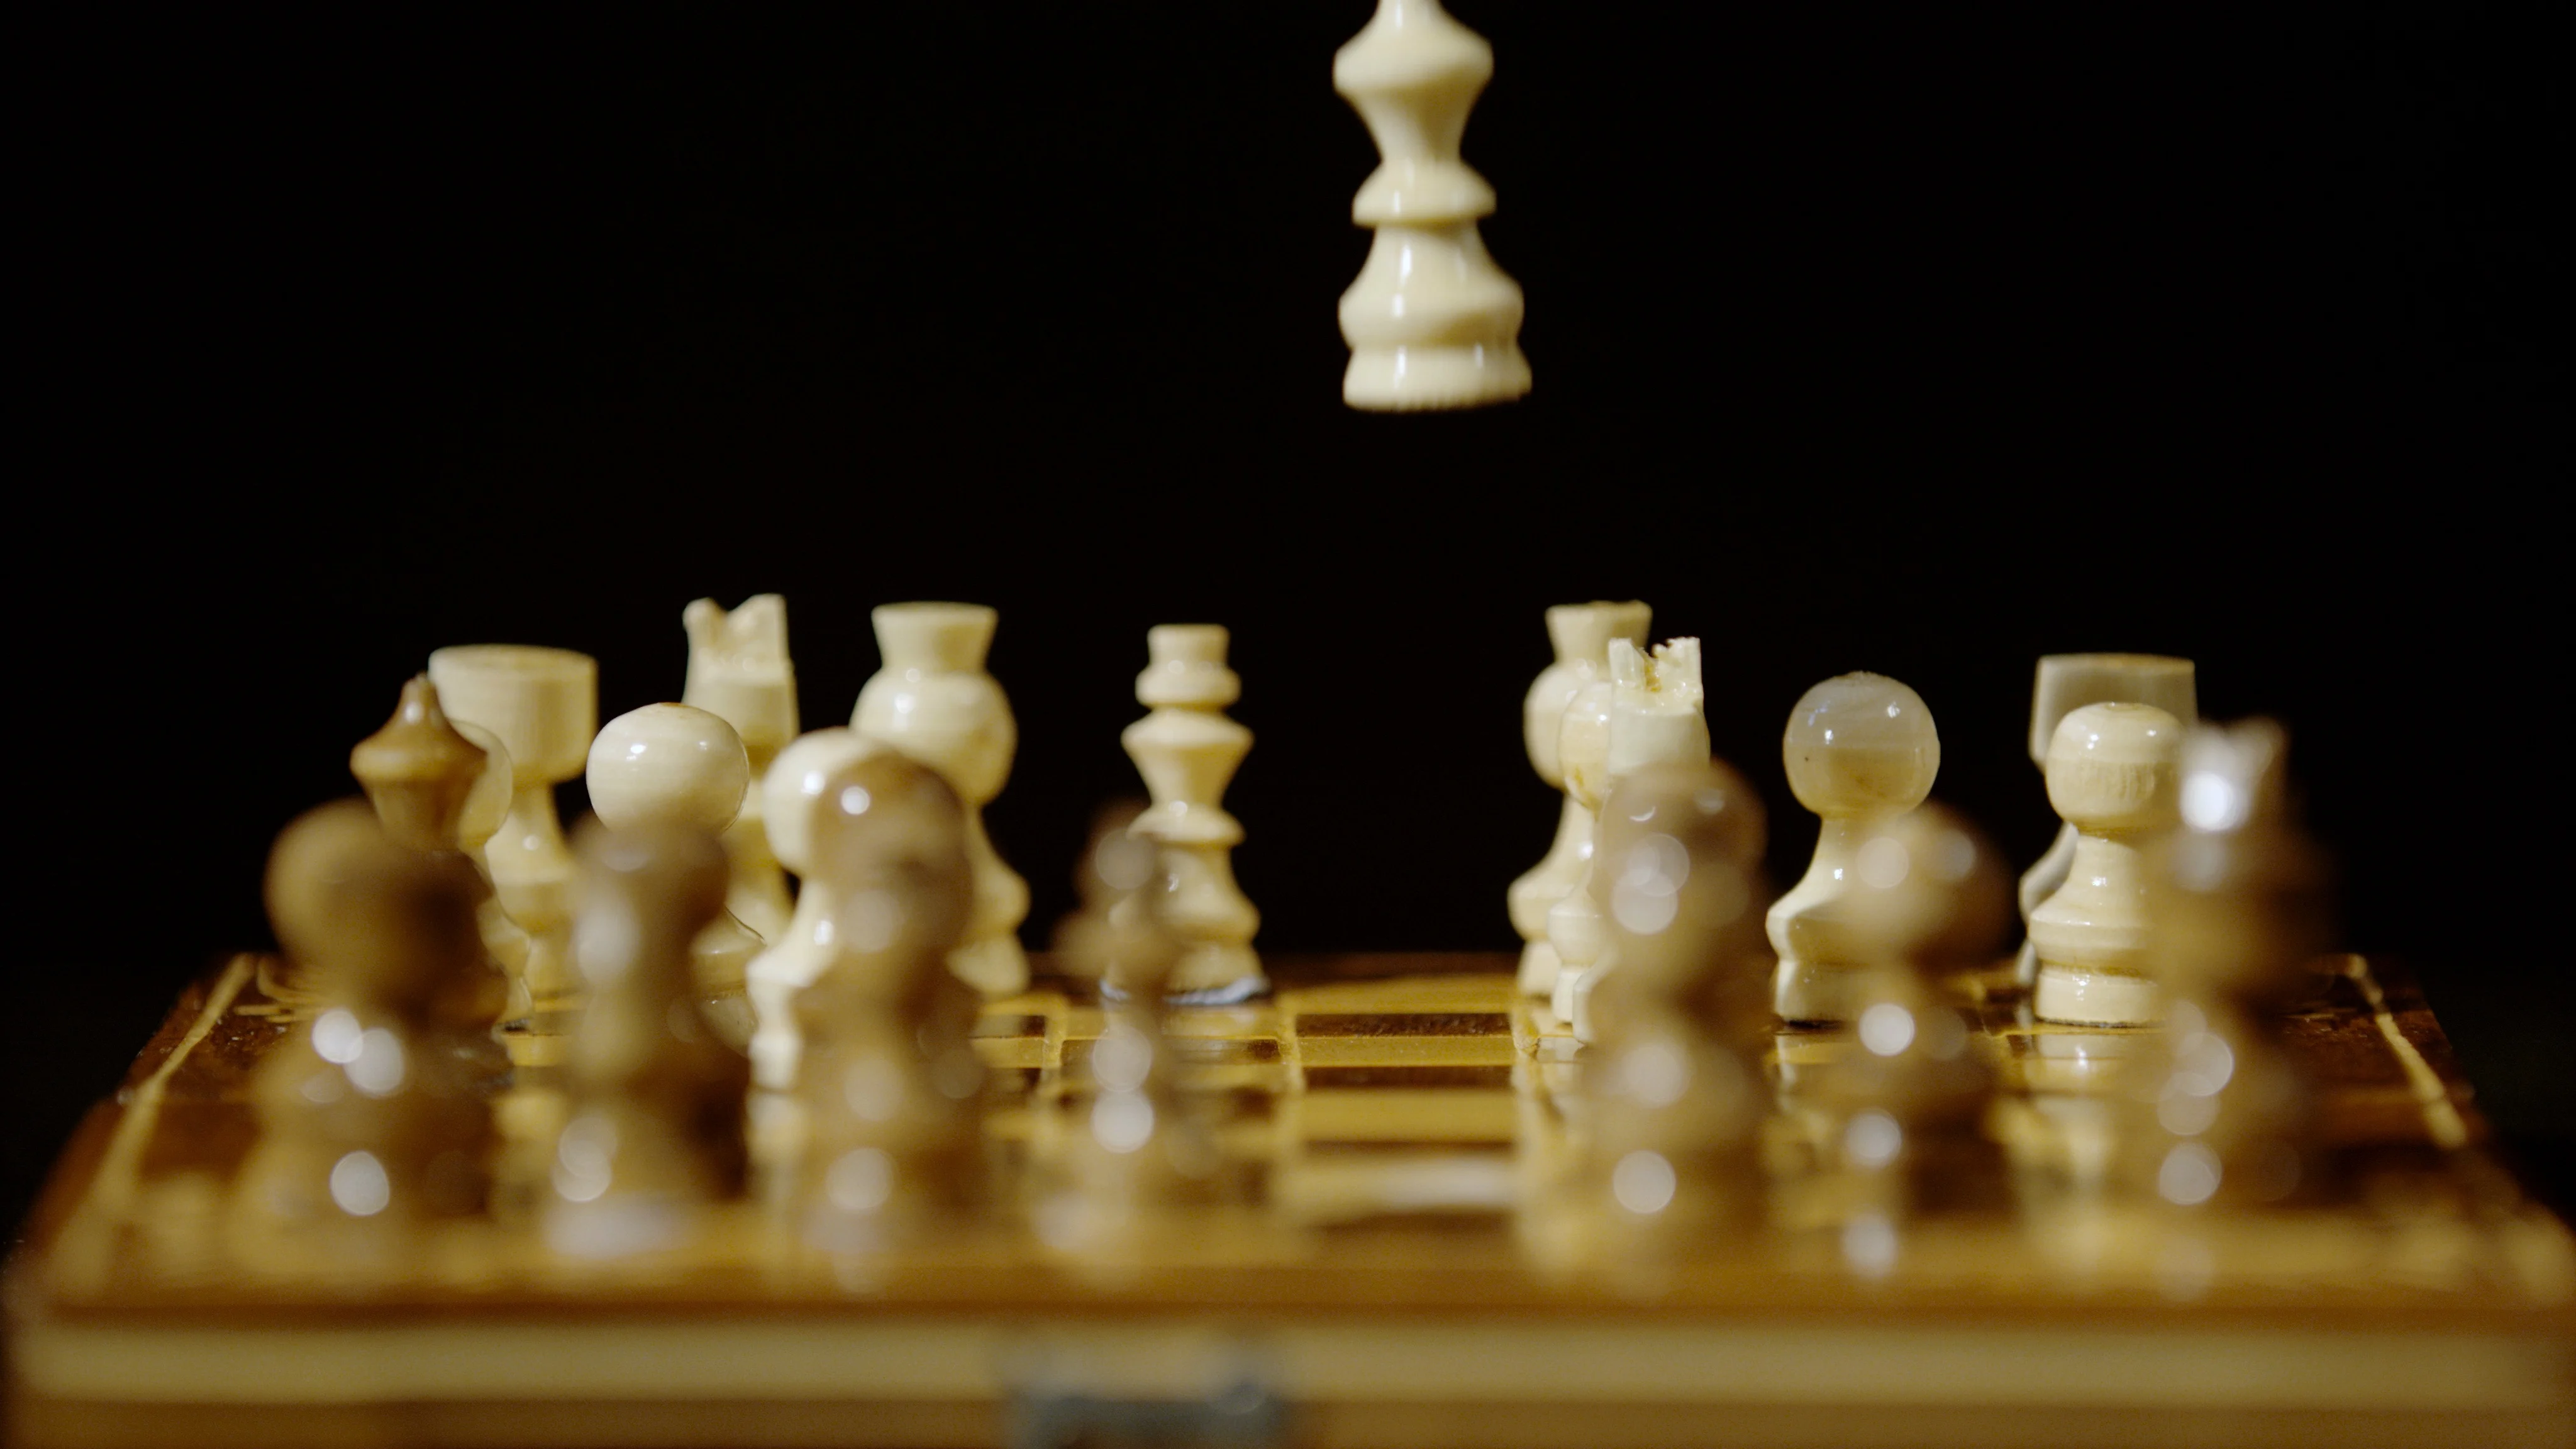 Super Slow Motion Chess Pieces Fall on the Chessboard. Filmed on a